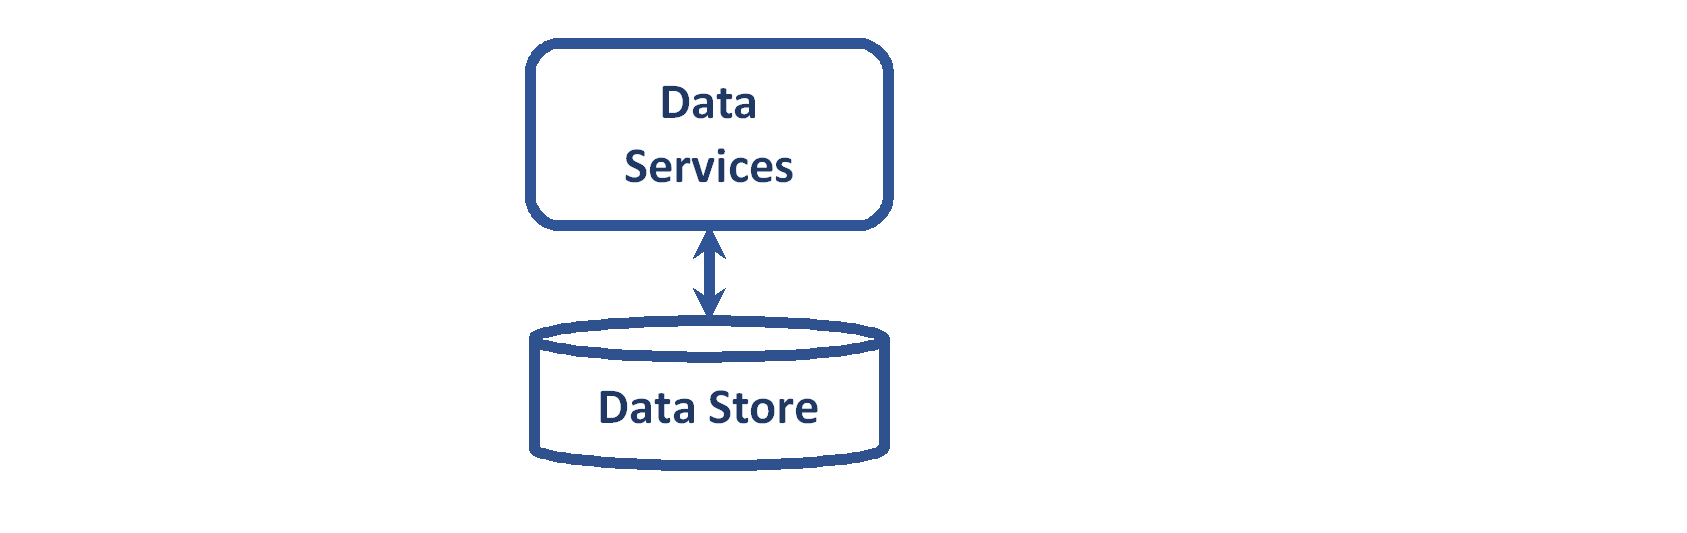 Drawing depicts a data service component connected to a data store.